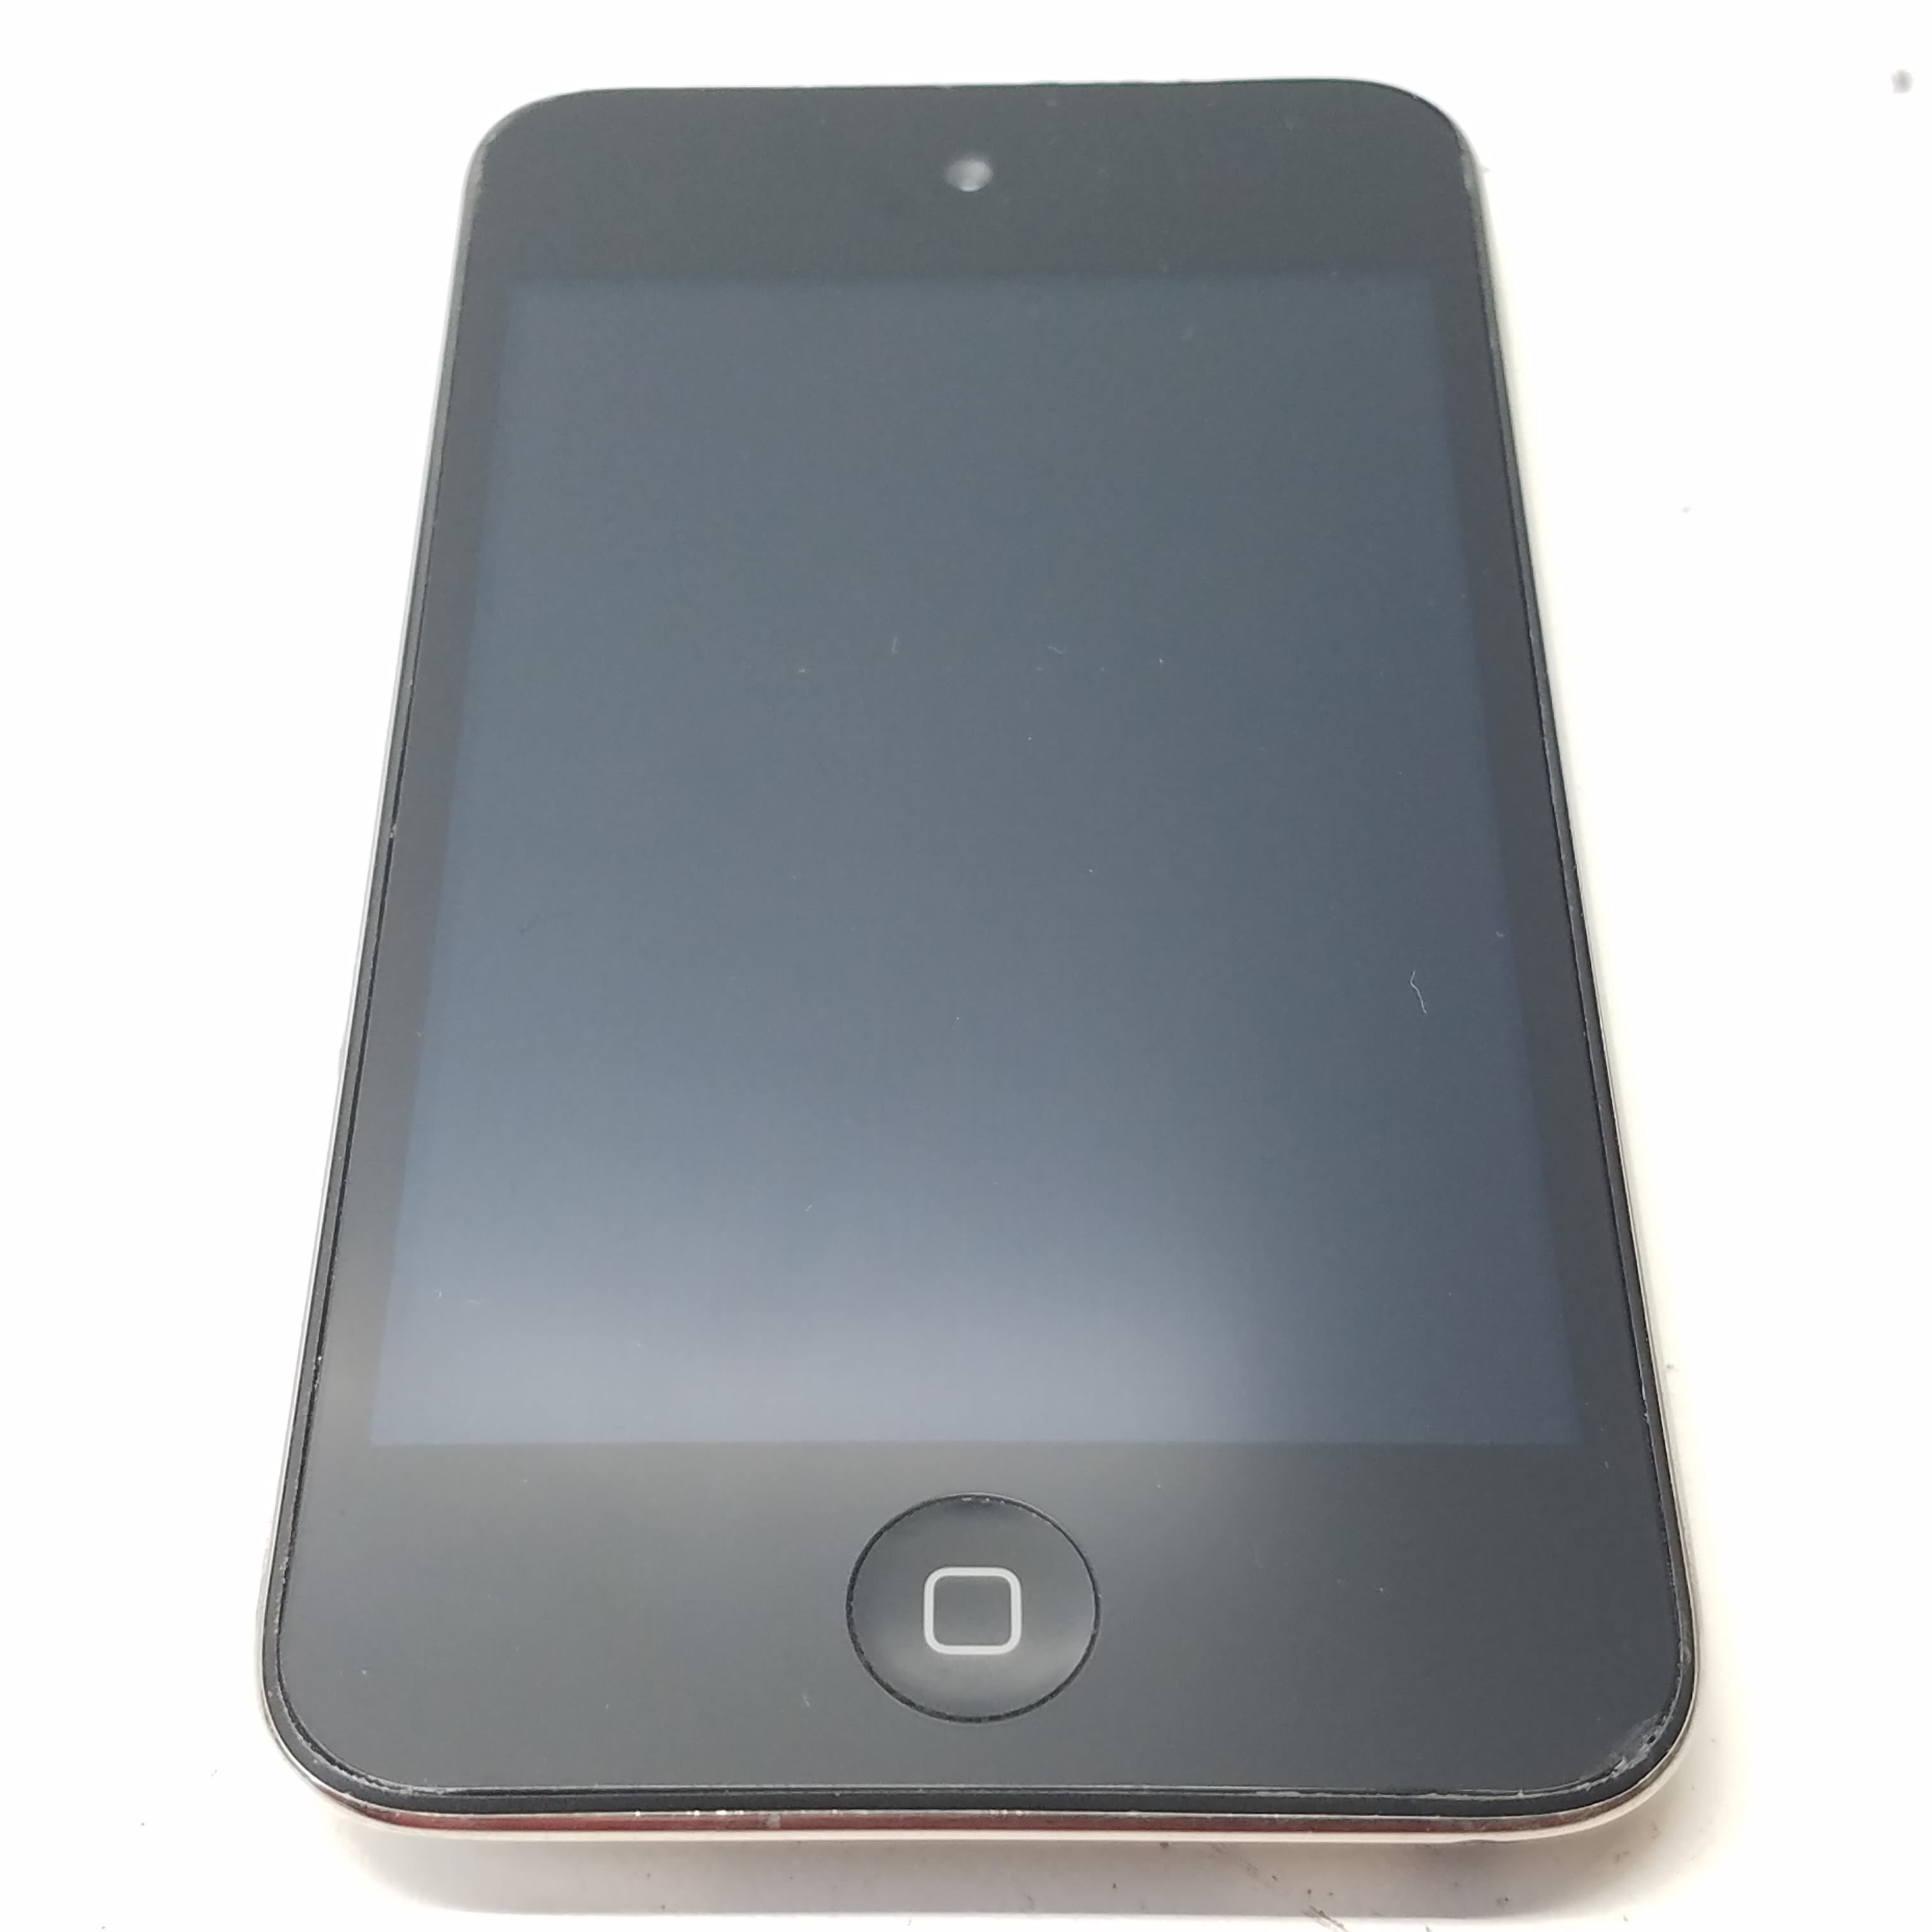 Buy the Apple iPod Touch (4th Generation) - Black (A1367) 8GB 